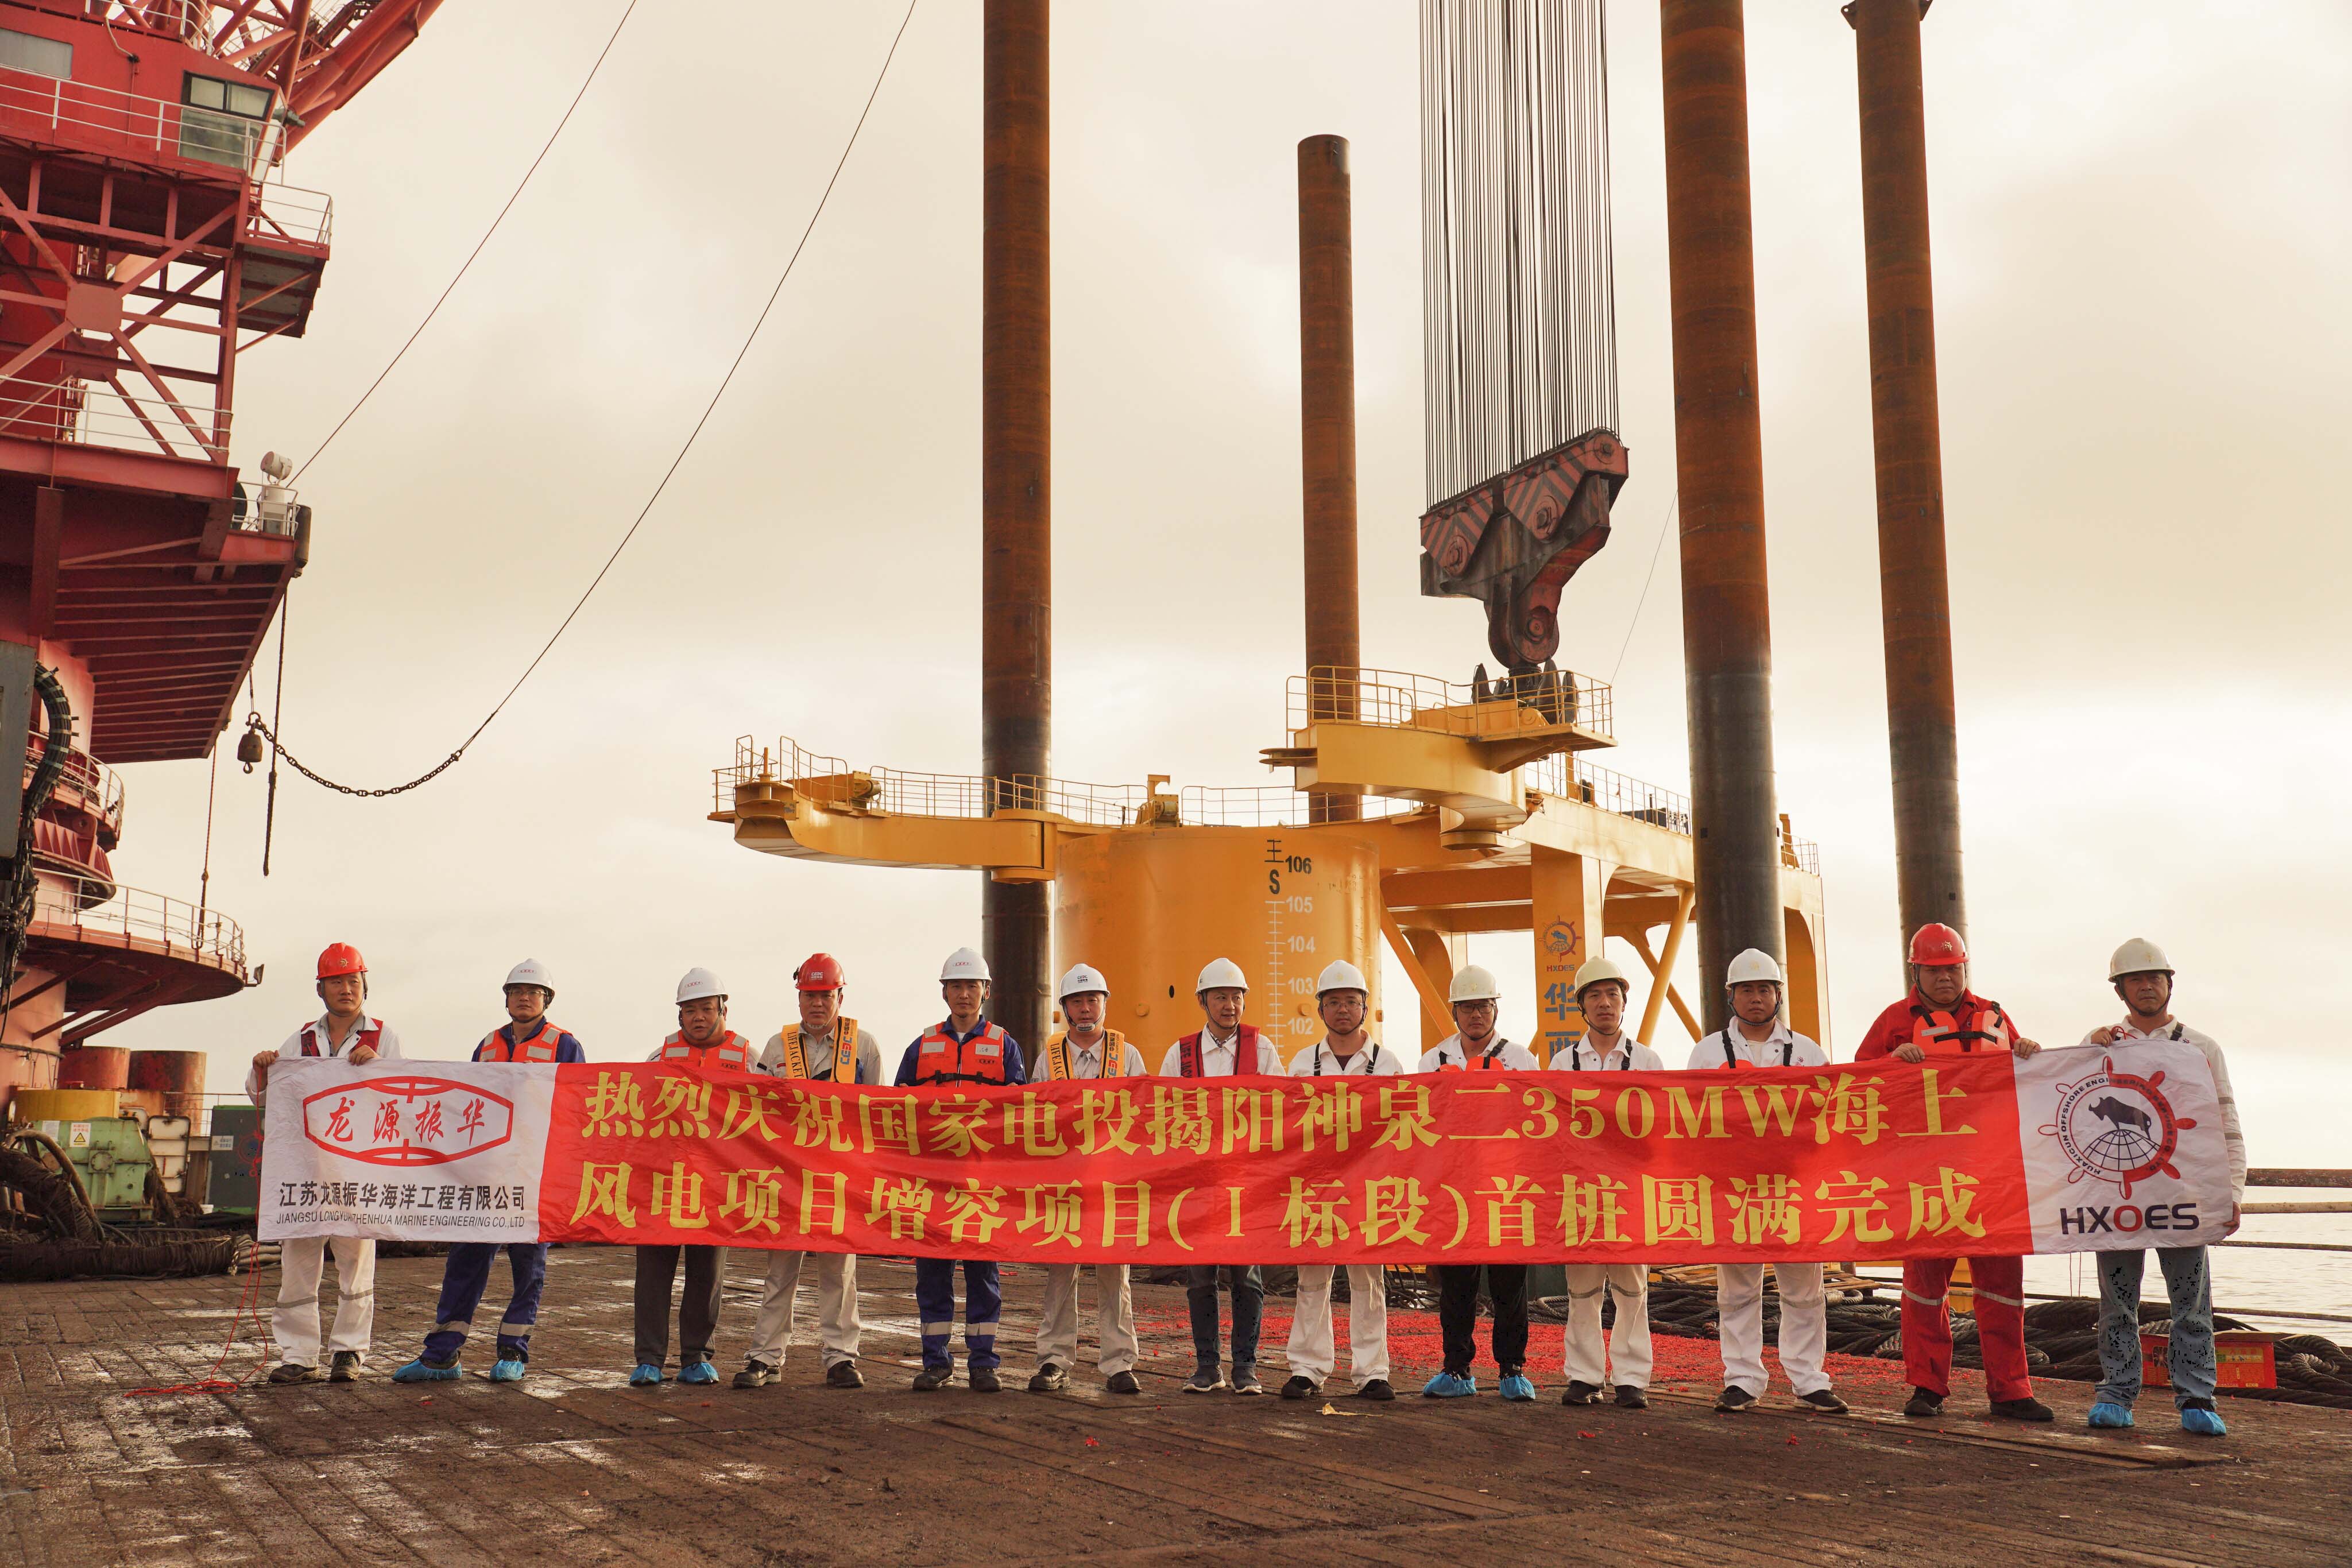 Huaxi 5000 successfully completed the construction of the first pile of bid section I of the national power investment Jieyang Shenquan II project